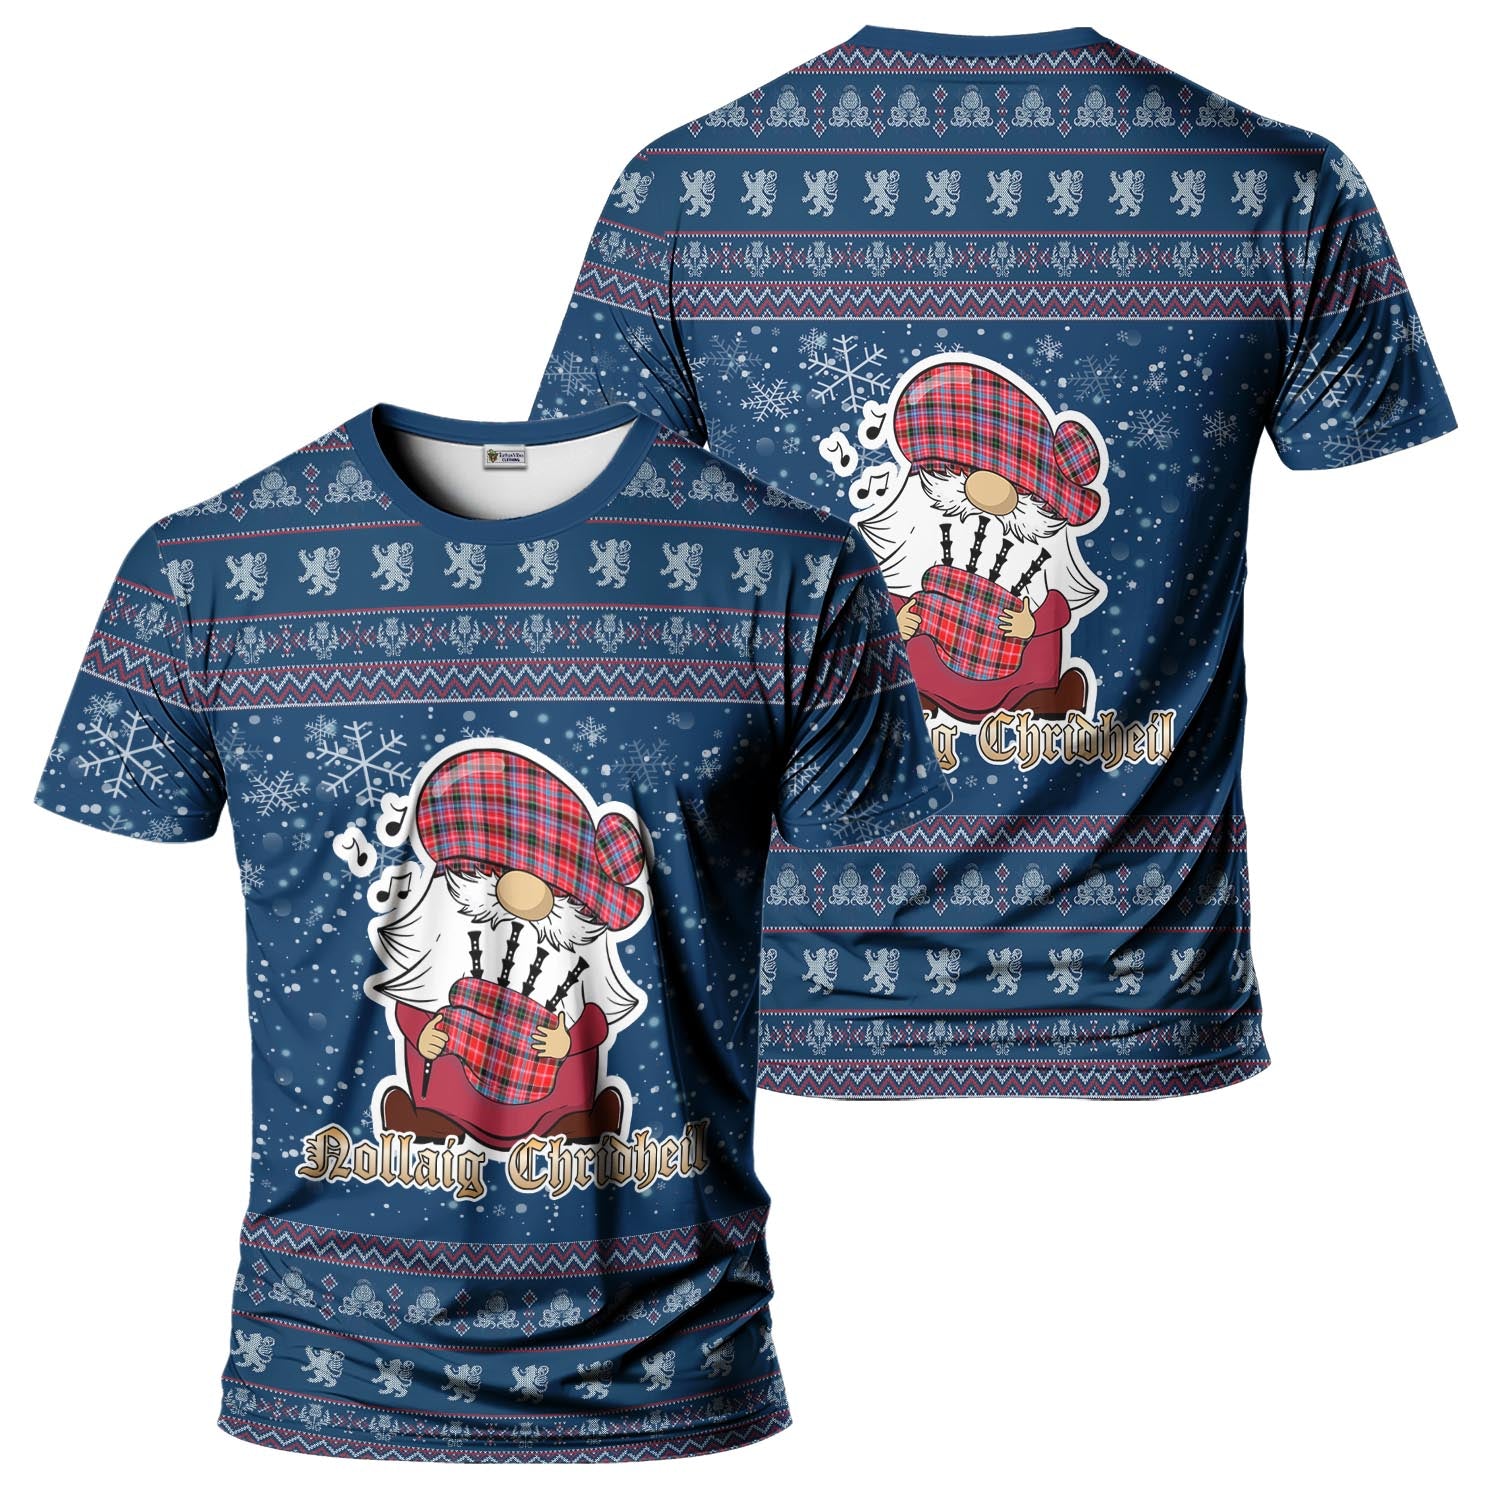 Aberdeen District Clan Christmas Family T-Shirt with Funny Gnome Playing Bagpipes Kid's Shirt Blue - Tartanvibesclothing